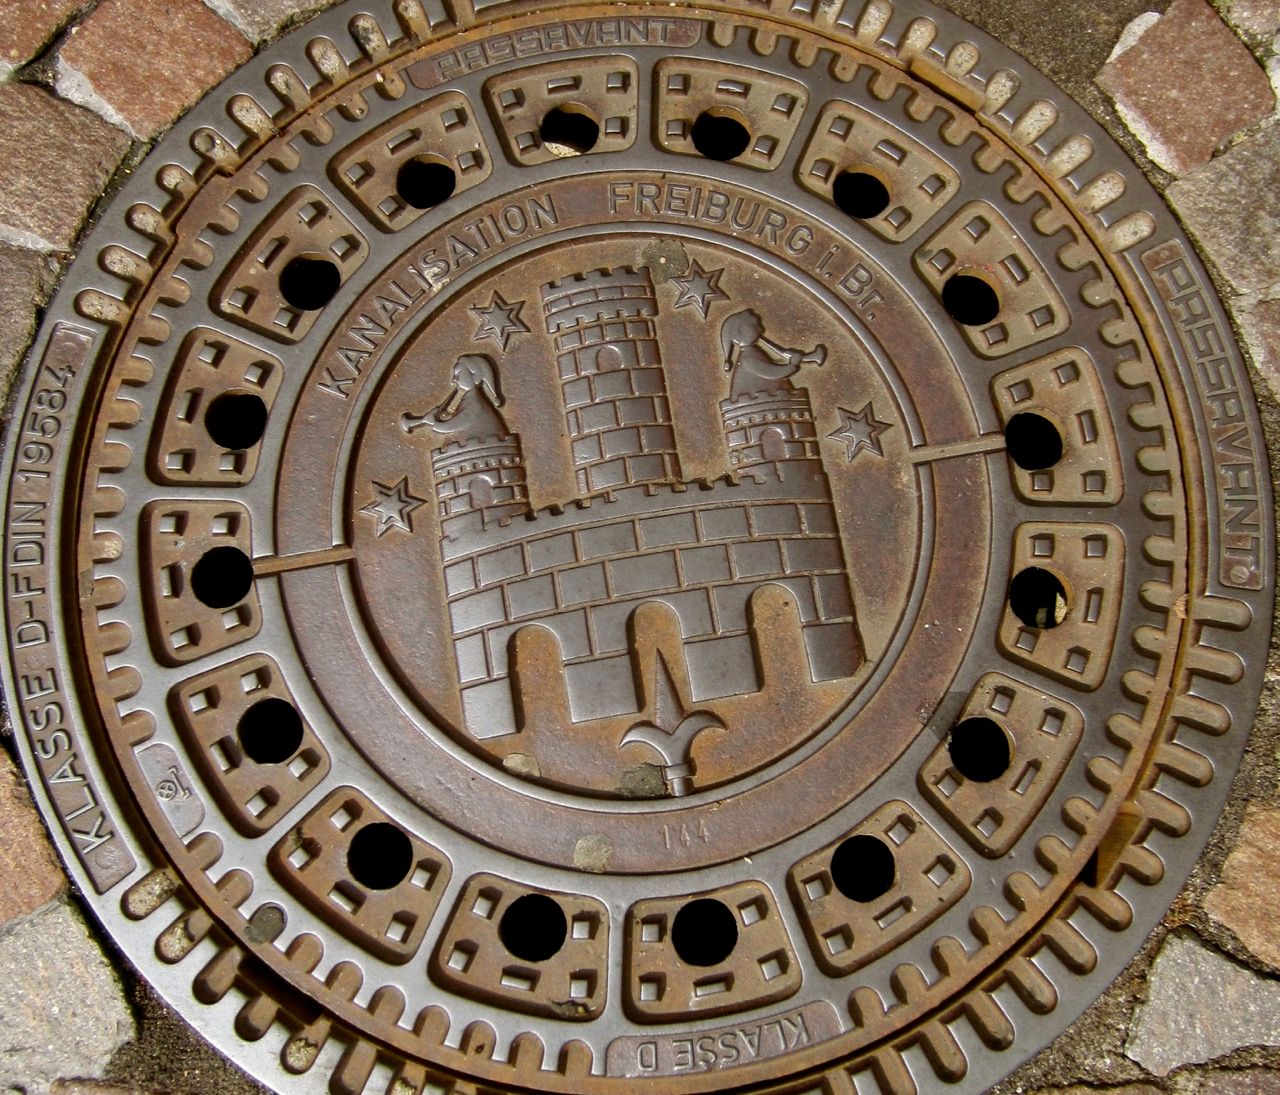 A manhole cover with elaborate artwork of a castle.